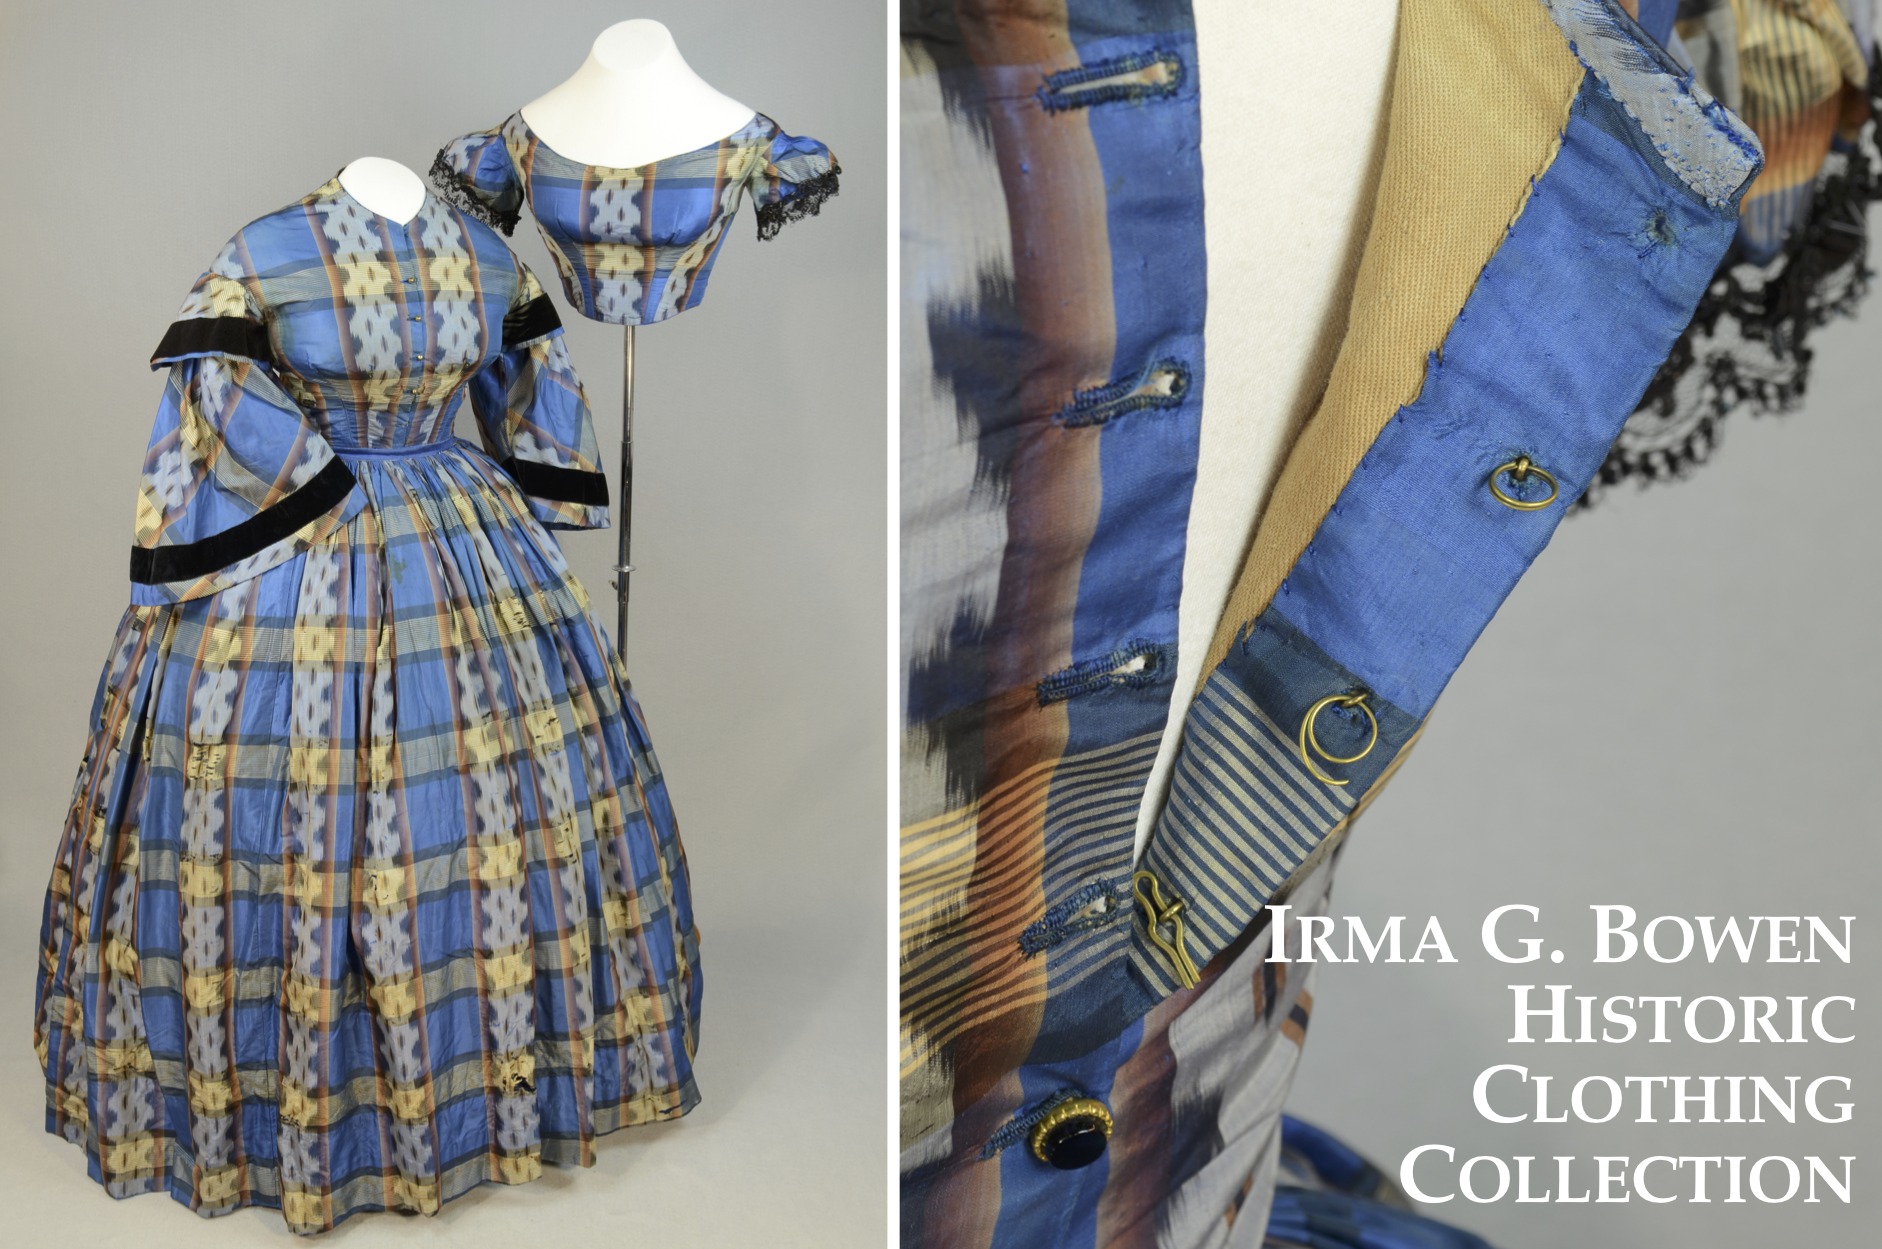 Irma G. Bowen Historic Clothing Collection - University of New Hampshire, Digital Collections